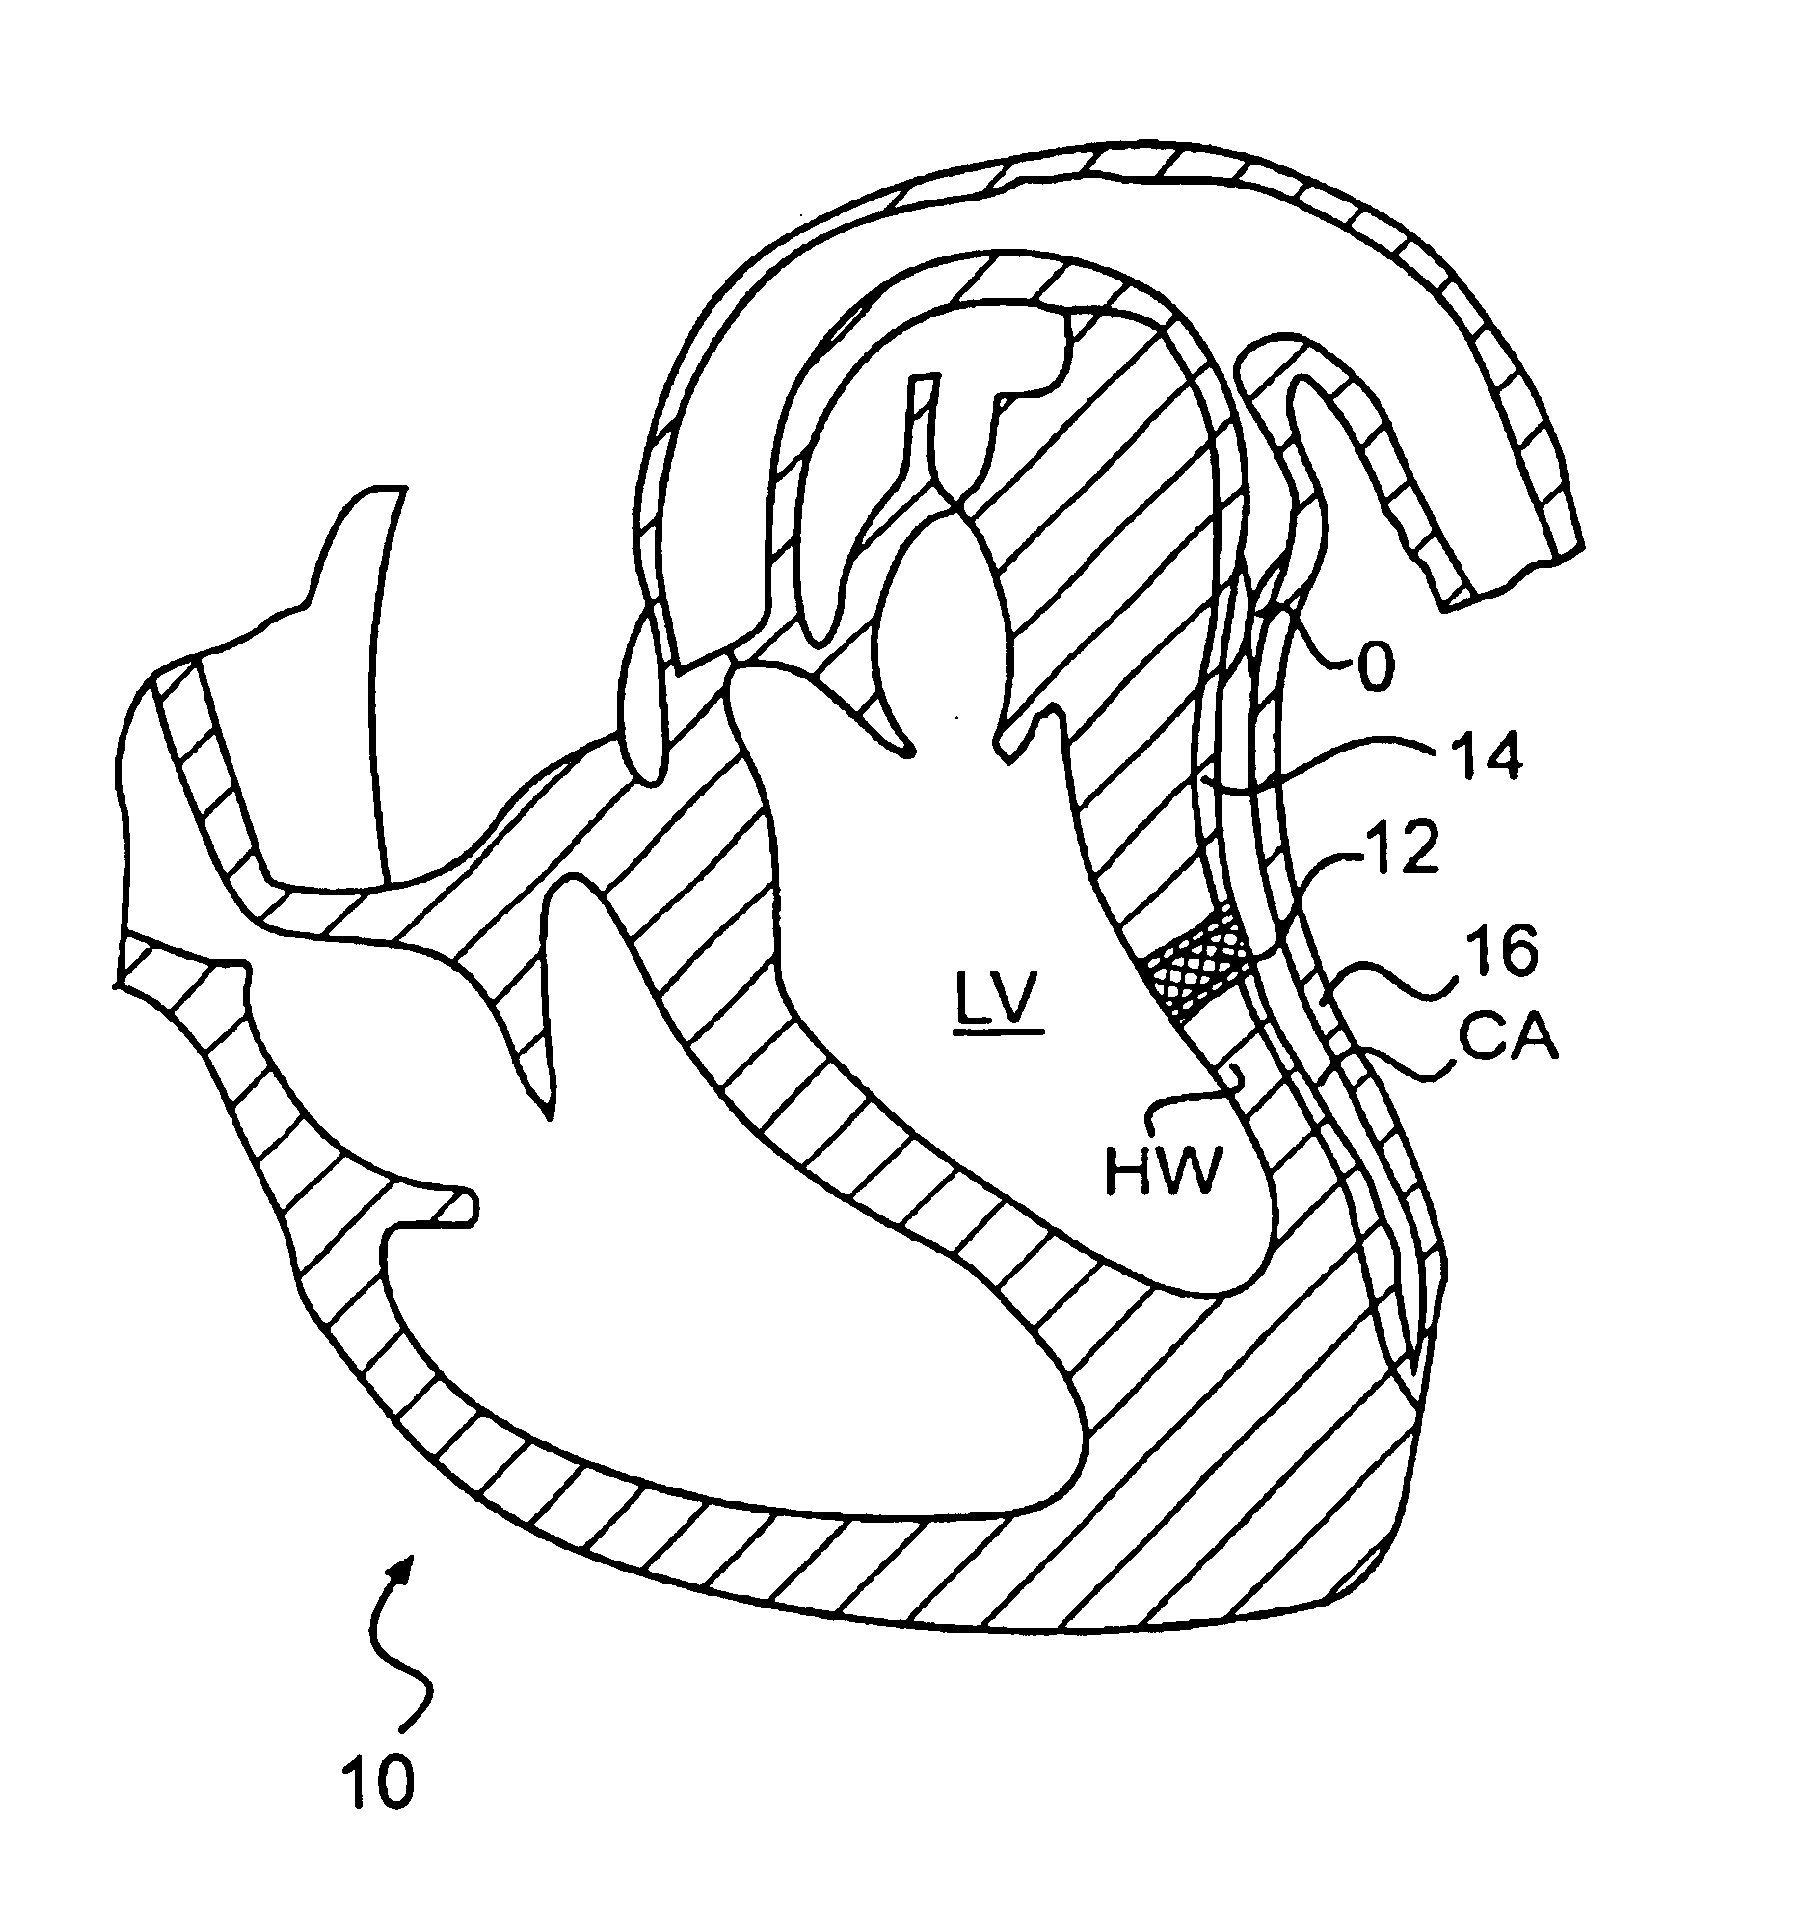 Methods and devices for delivering a ventricular stent